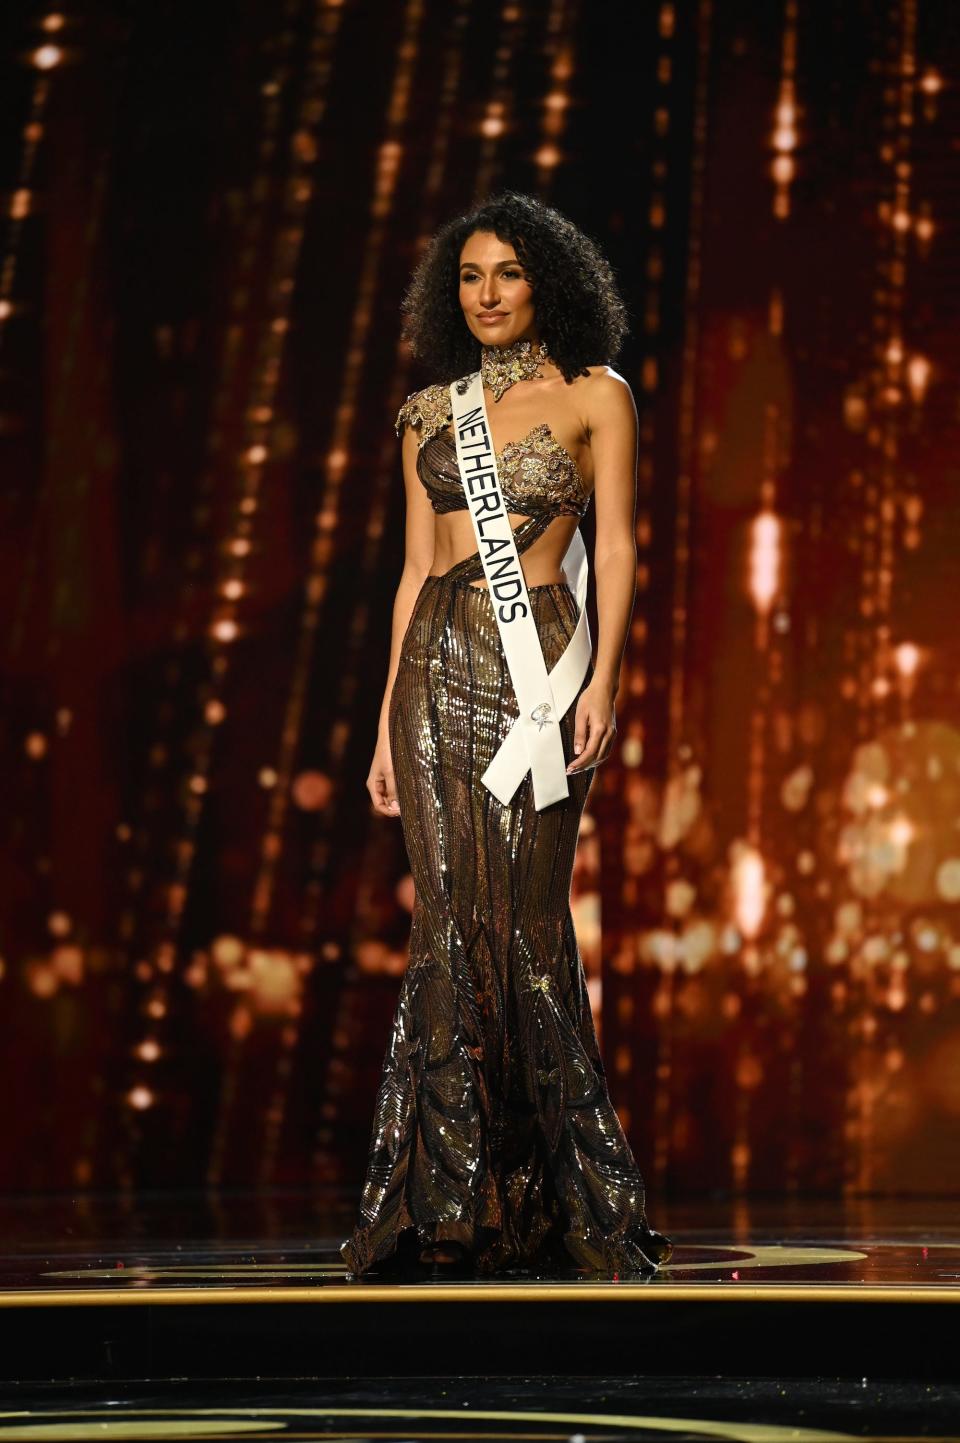 Miss Netherlands competes in the 71st annual Miss Universe pageant.